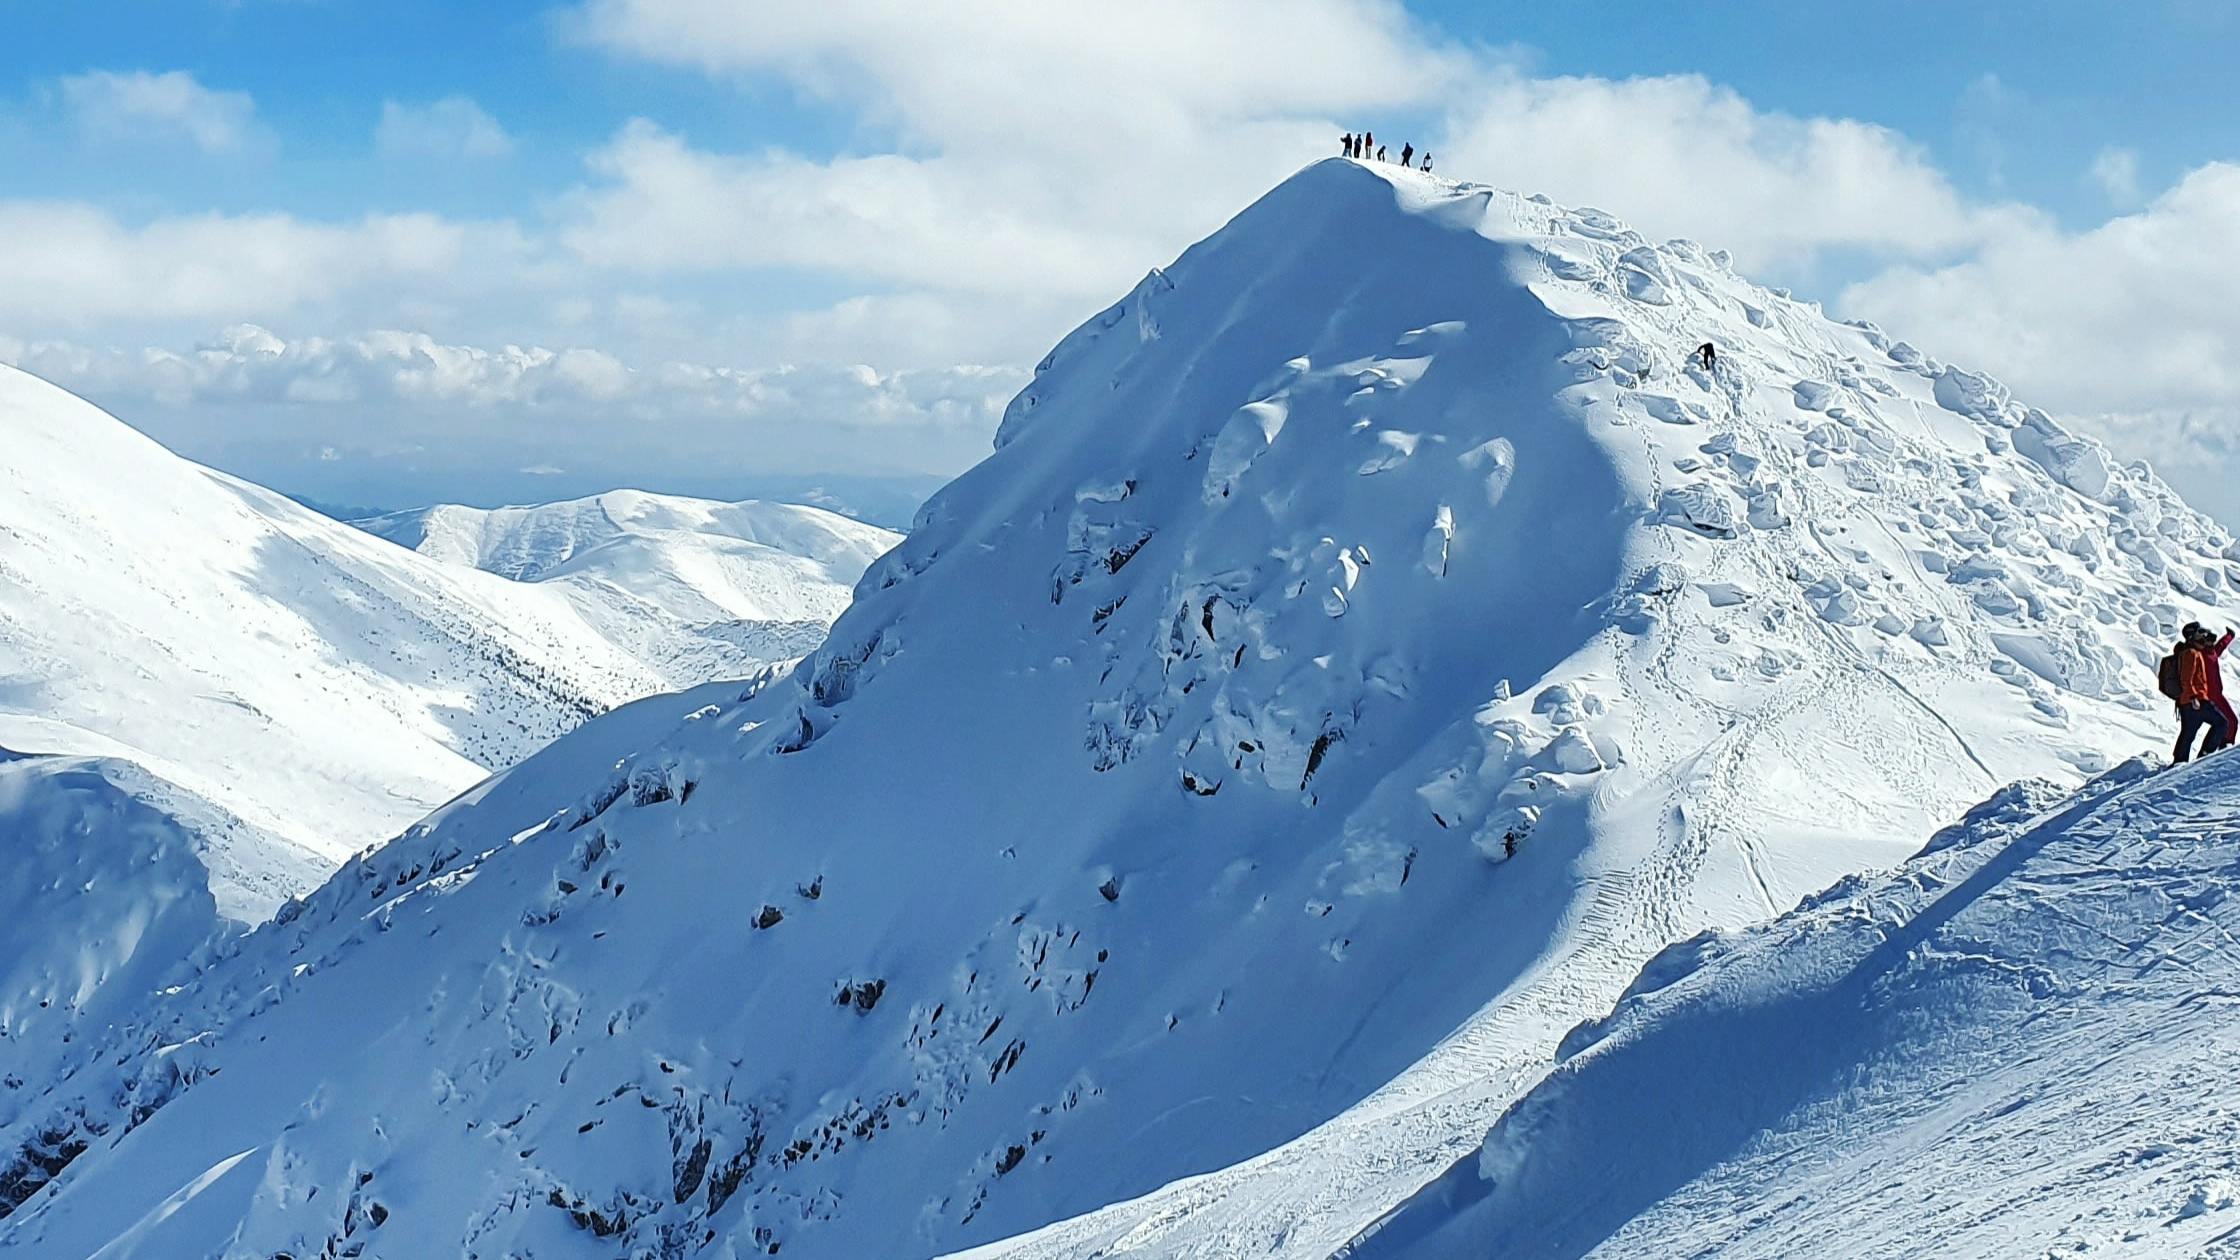 People stand on snowy mountaintops preparing to ski down them.